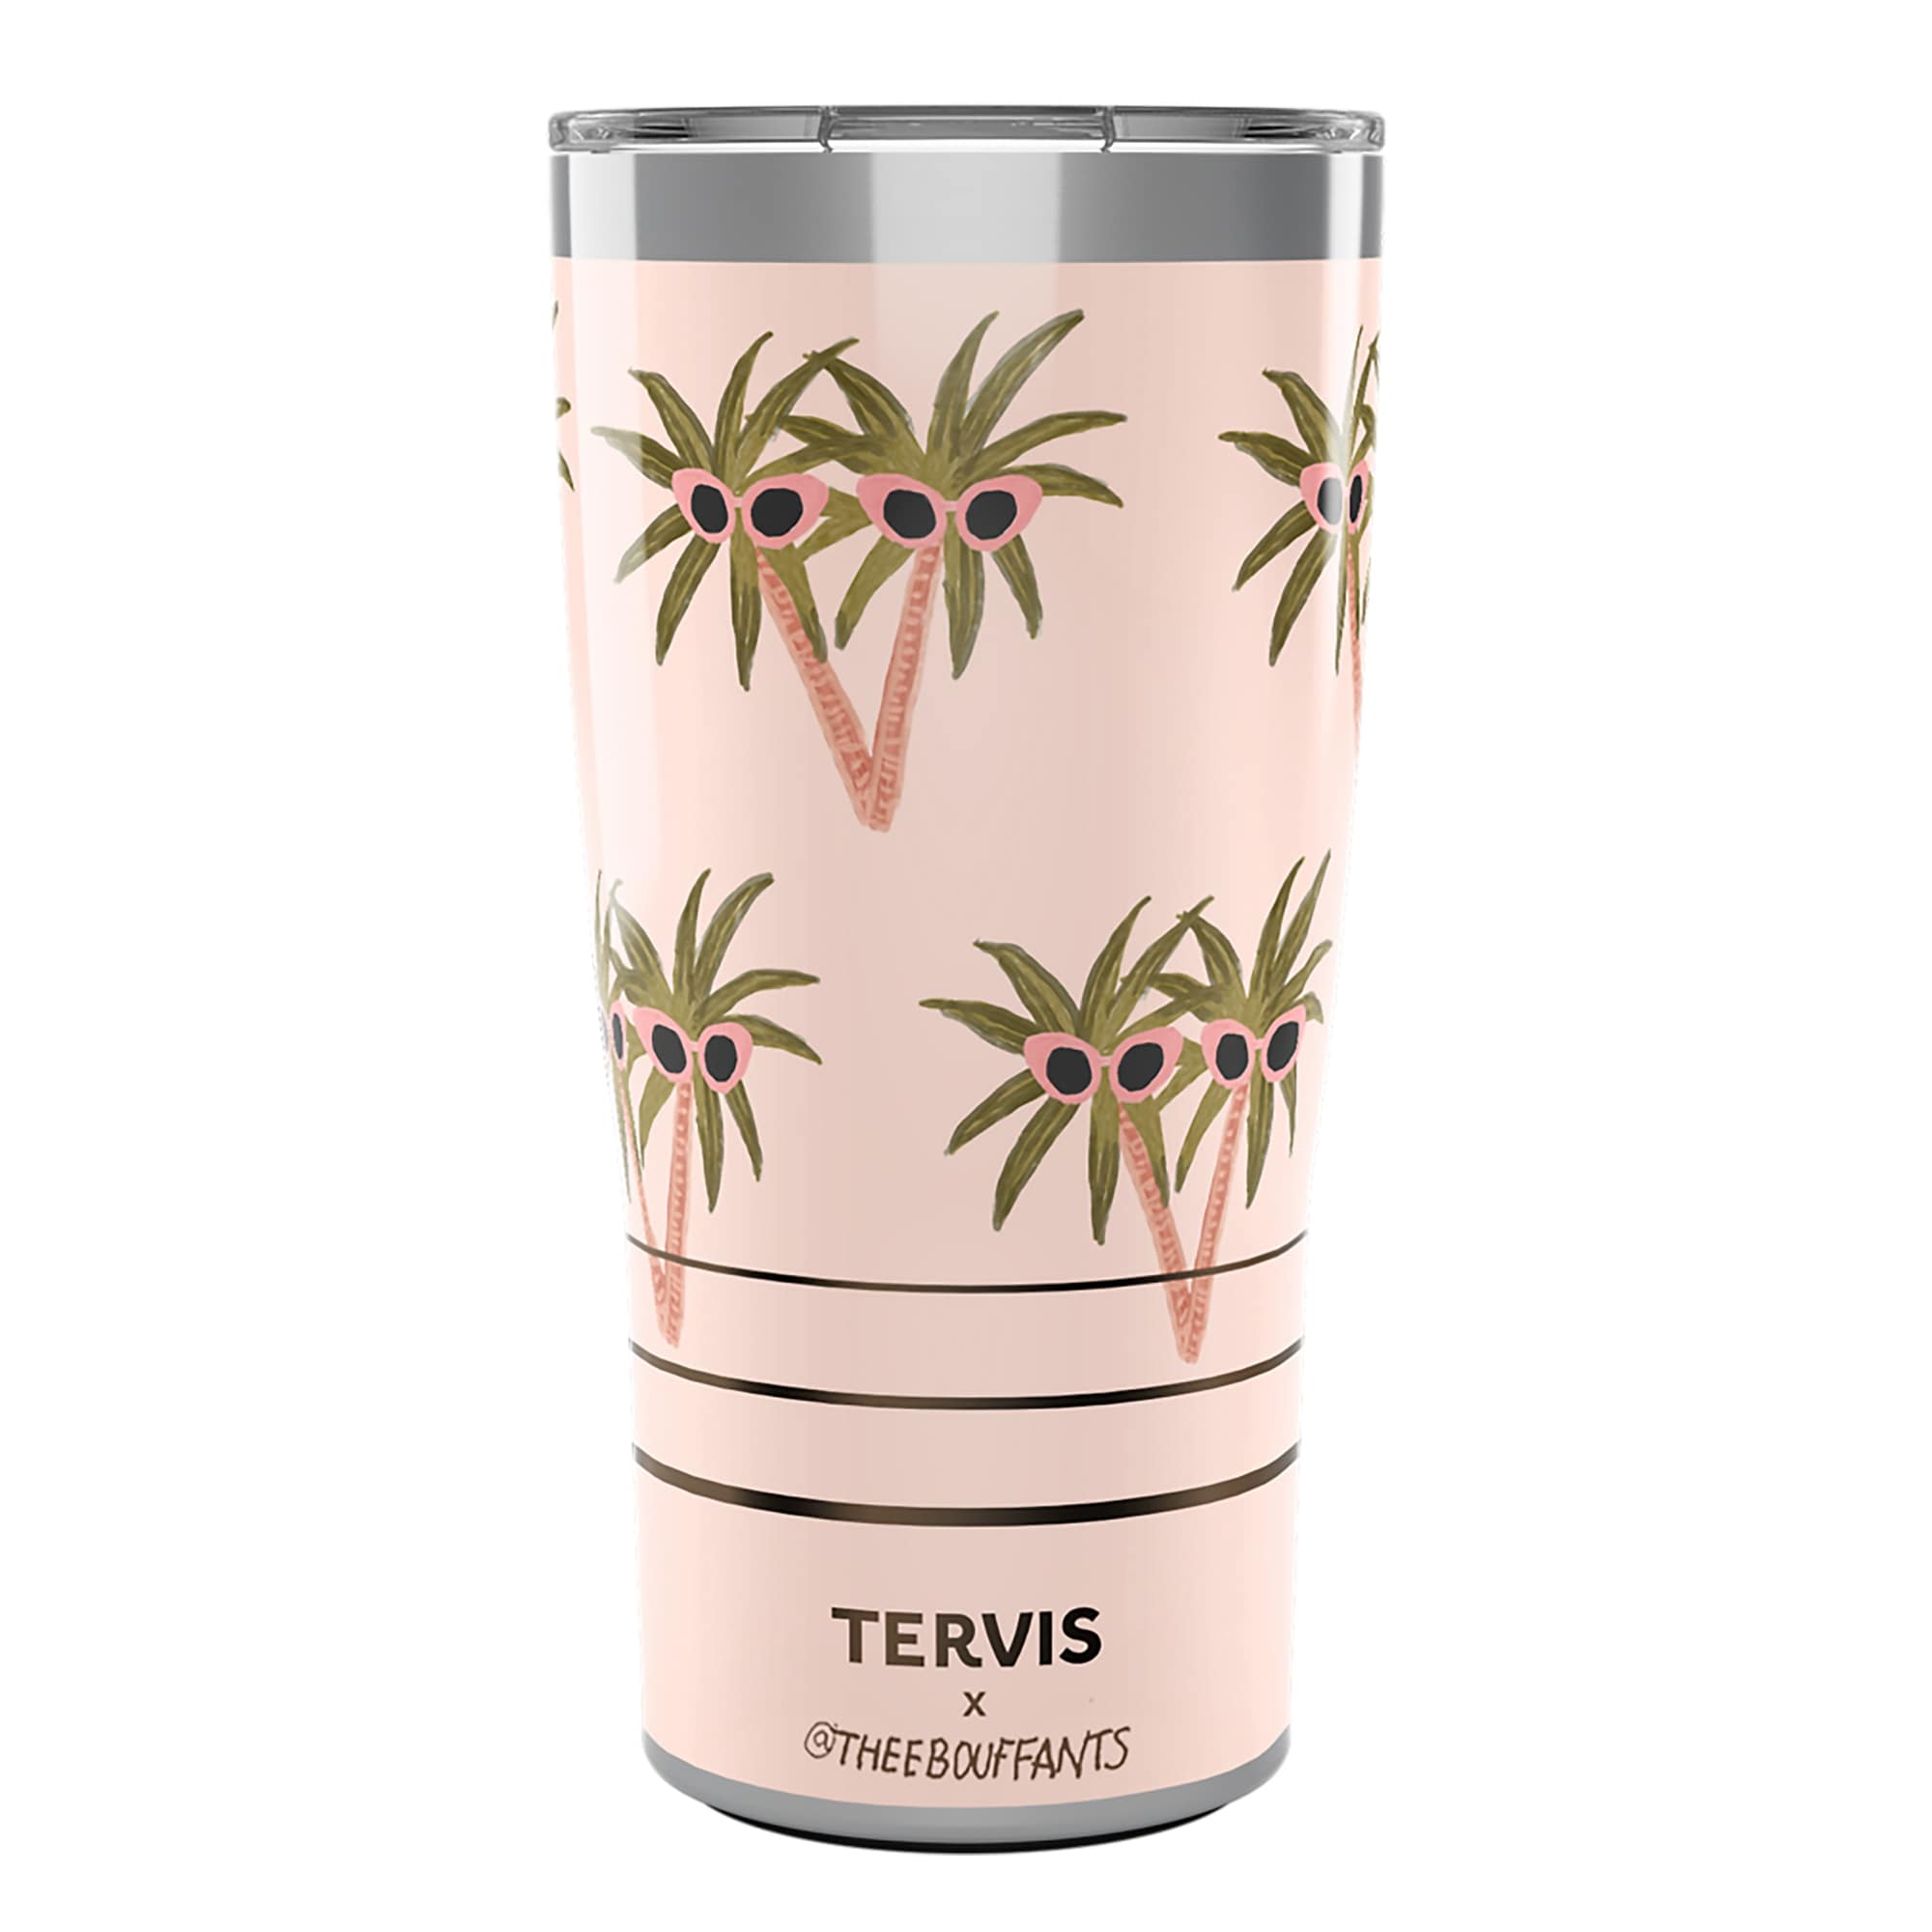 Tervis Traveler Bouffants and Broken Hearts Peeping Palm Parade Triple Walled Insulated Tumbler Travel 20oz, Stainless Steel